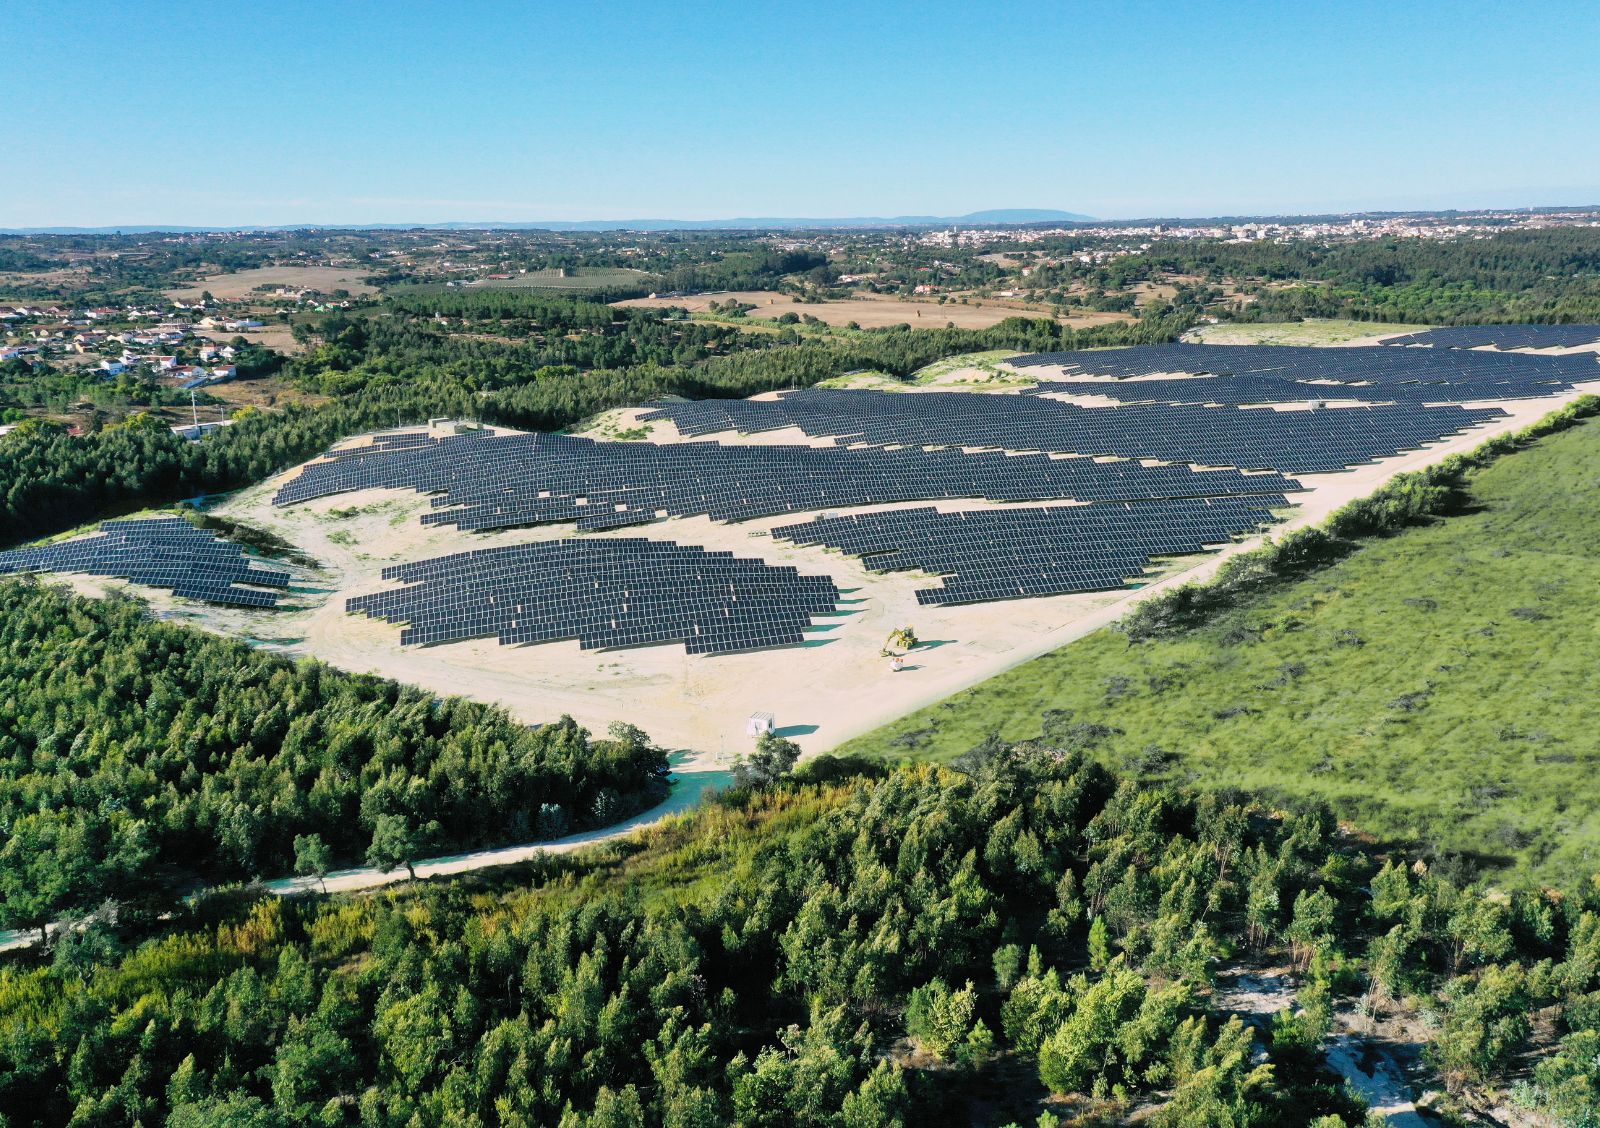 CARTAXO SOLAR PARK - SECOND TO BE SUCCESSFULLY BROUGHT ONLINE IN PORTUAL.